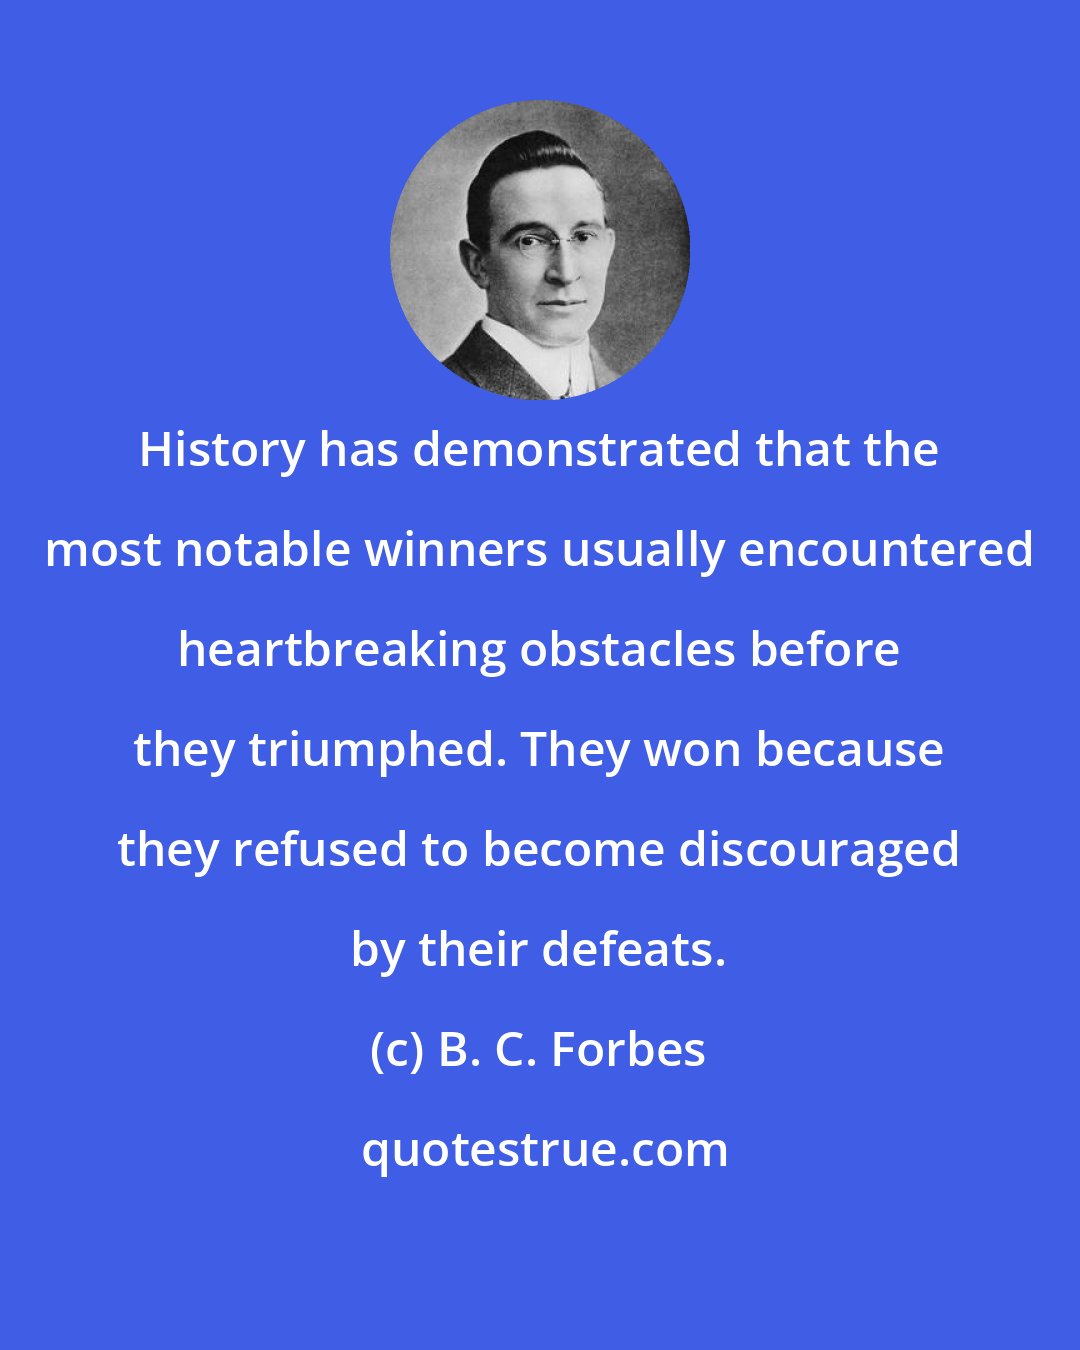 B. C. Forbes: History has demonstrated that the most notable winners usually encountered heartbreaking obstacles before they triumphed. They won because they refused to become discouraged by their defeats.